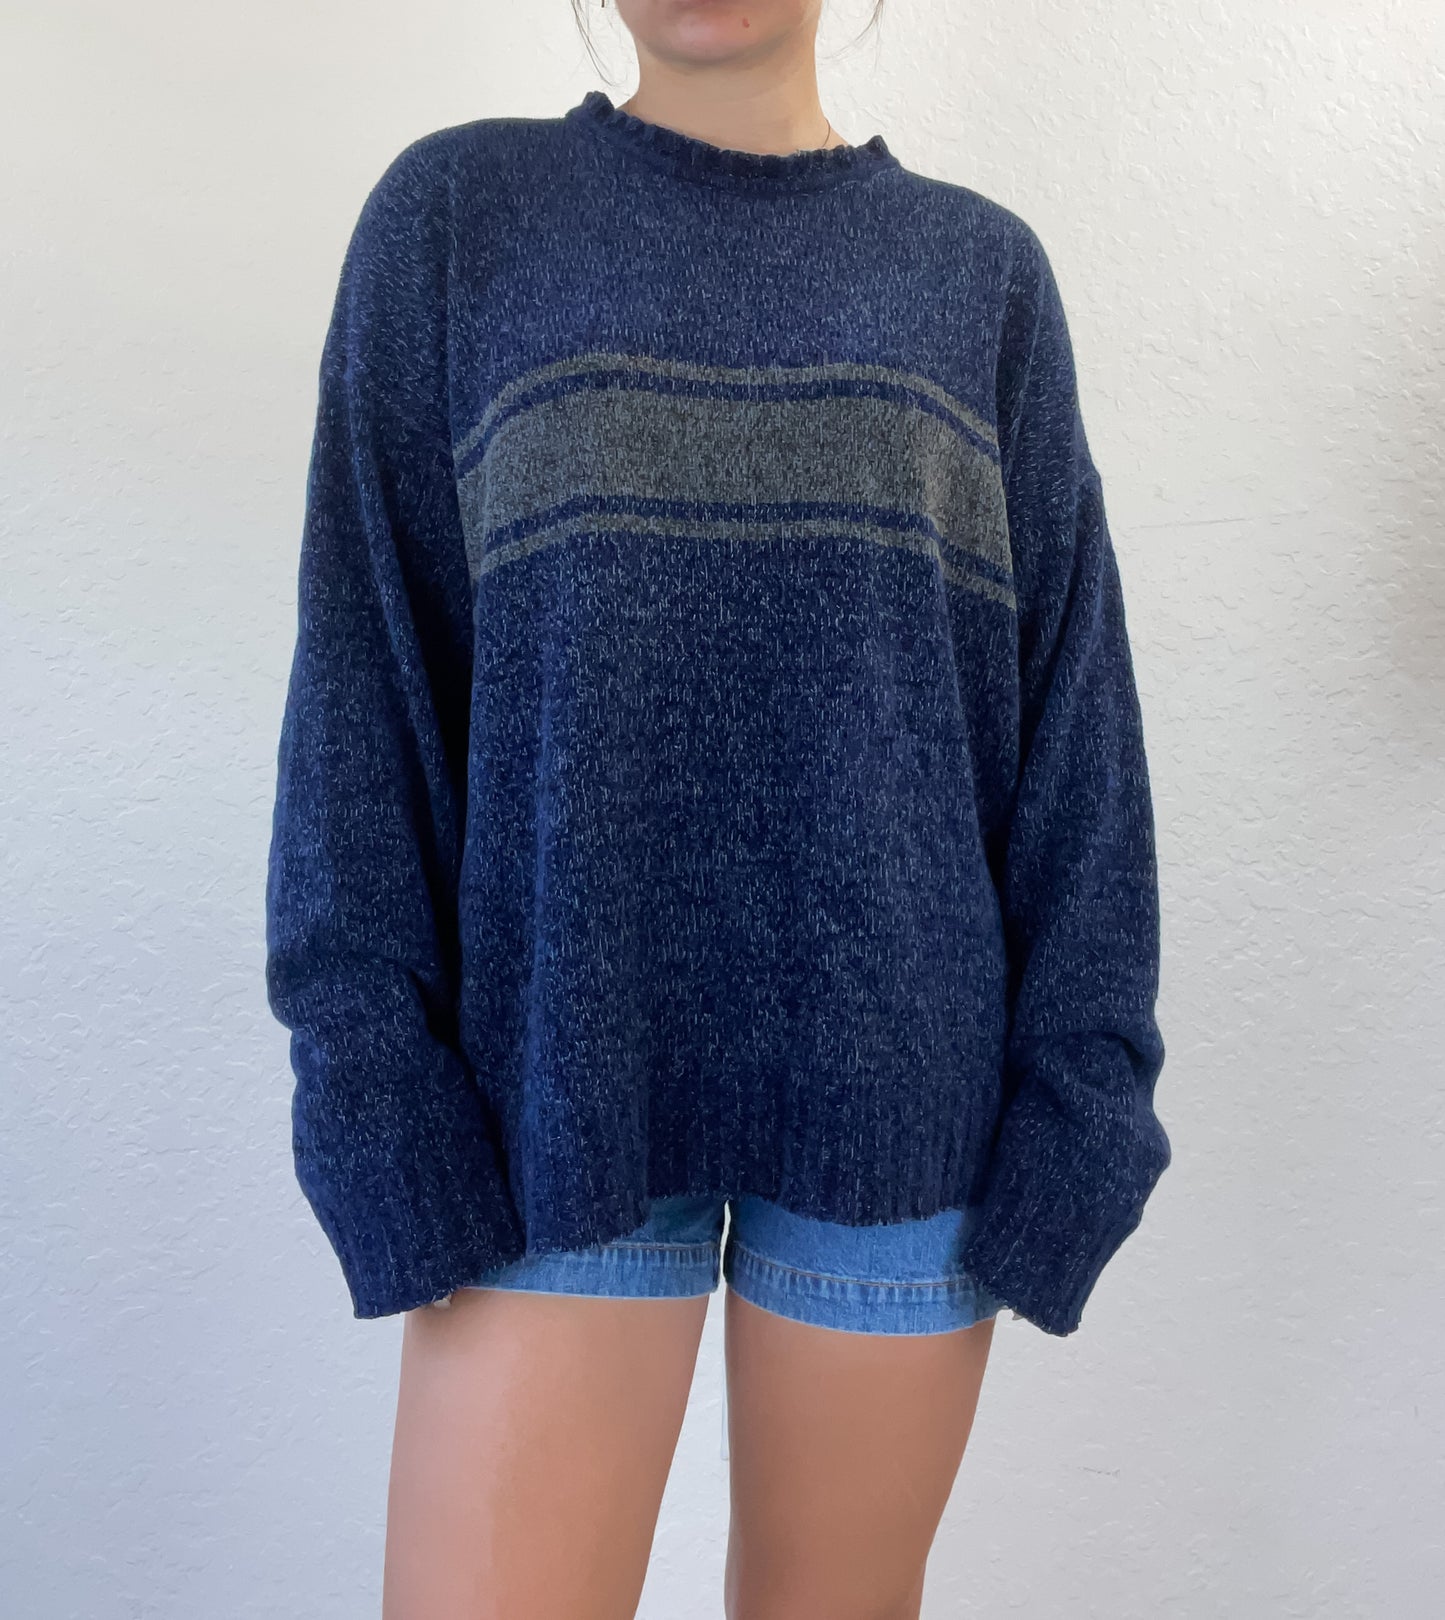 90s no name blue sweater